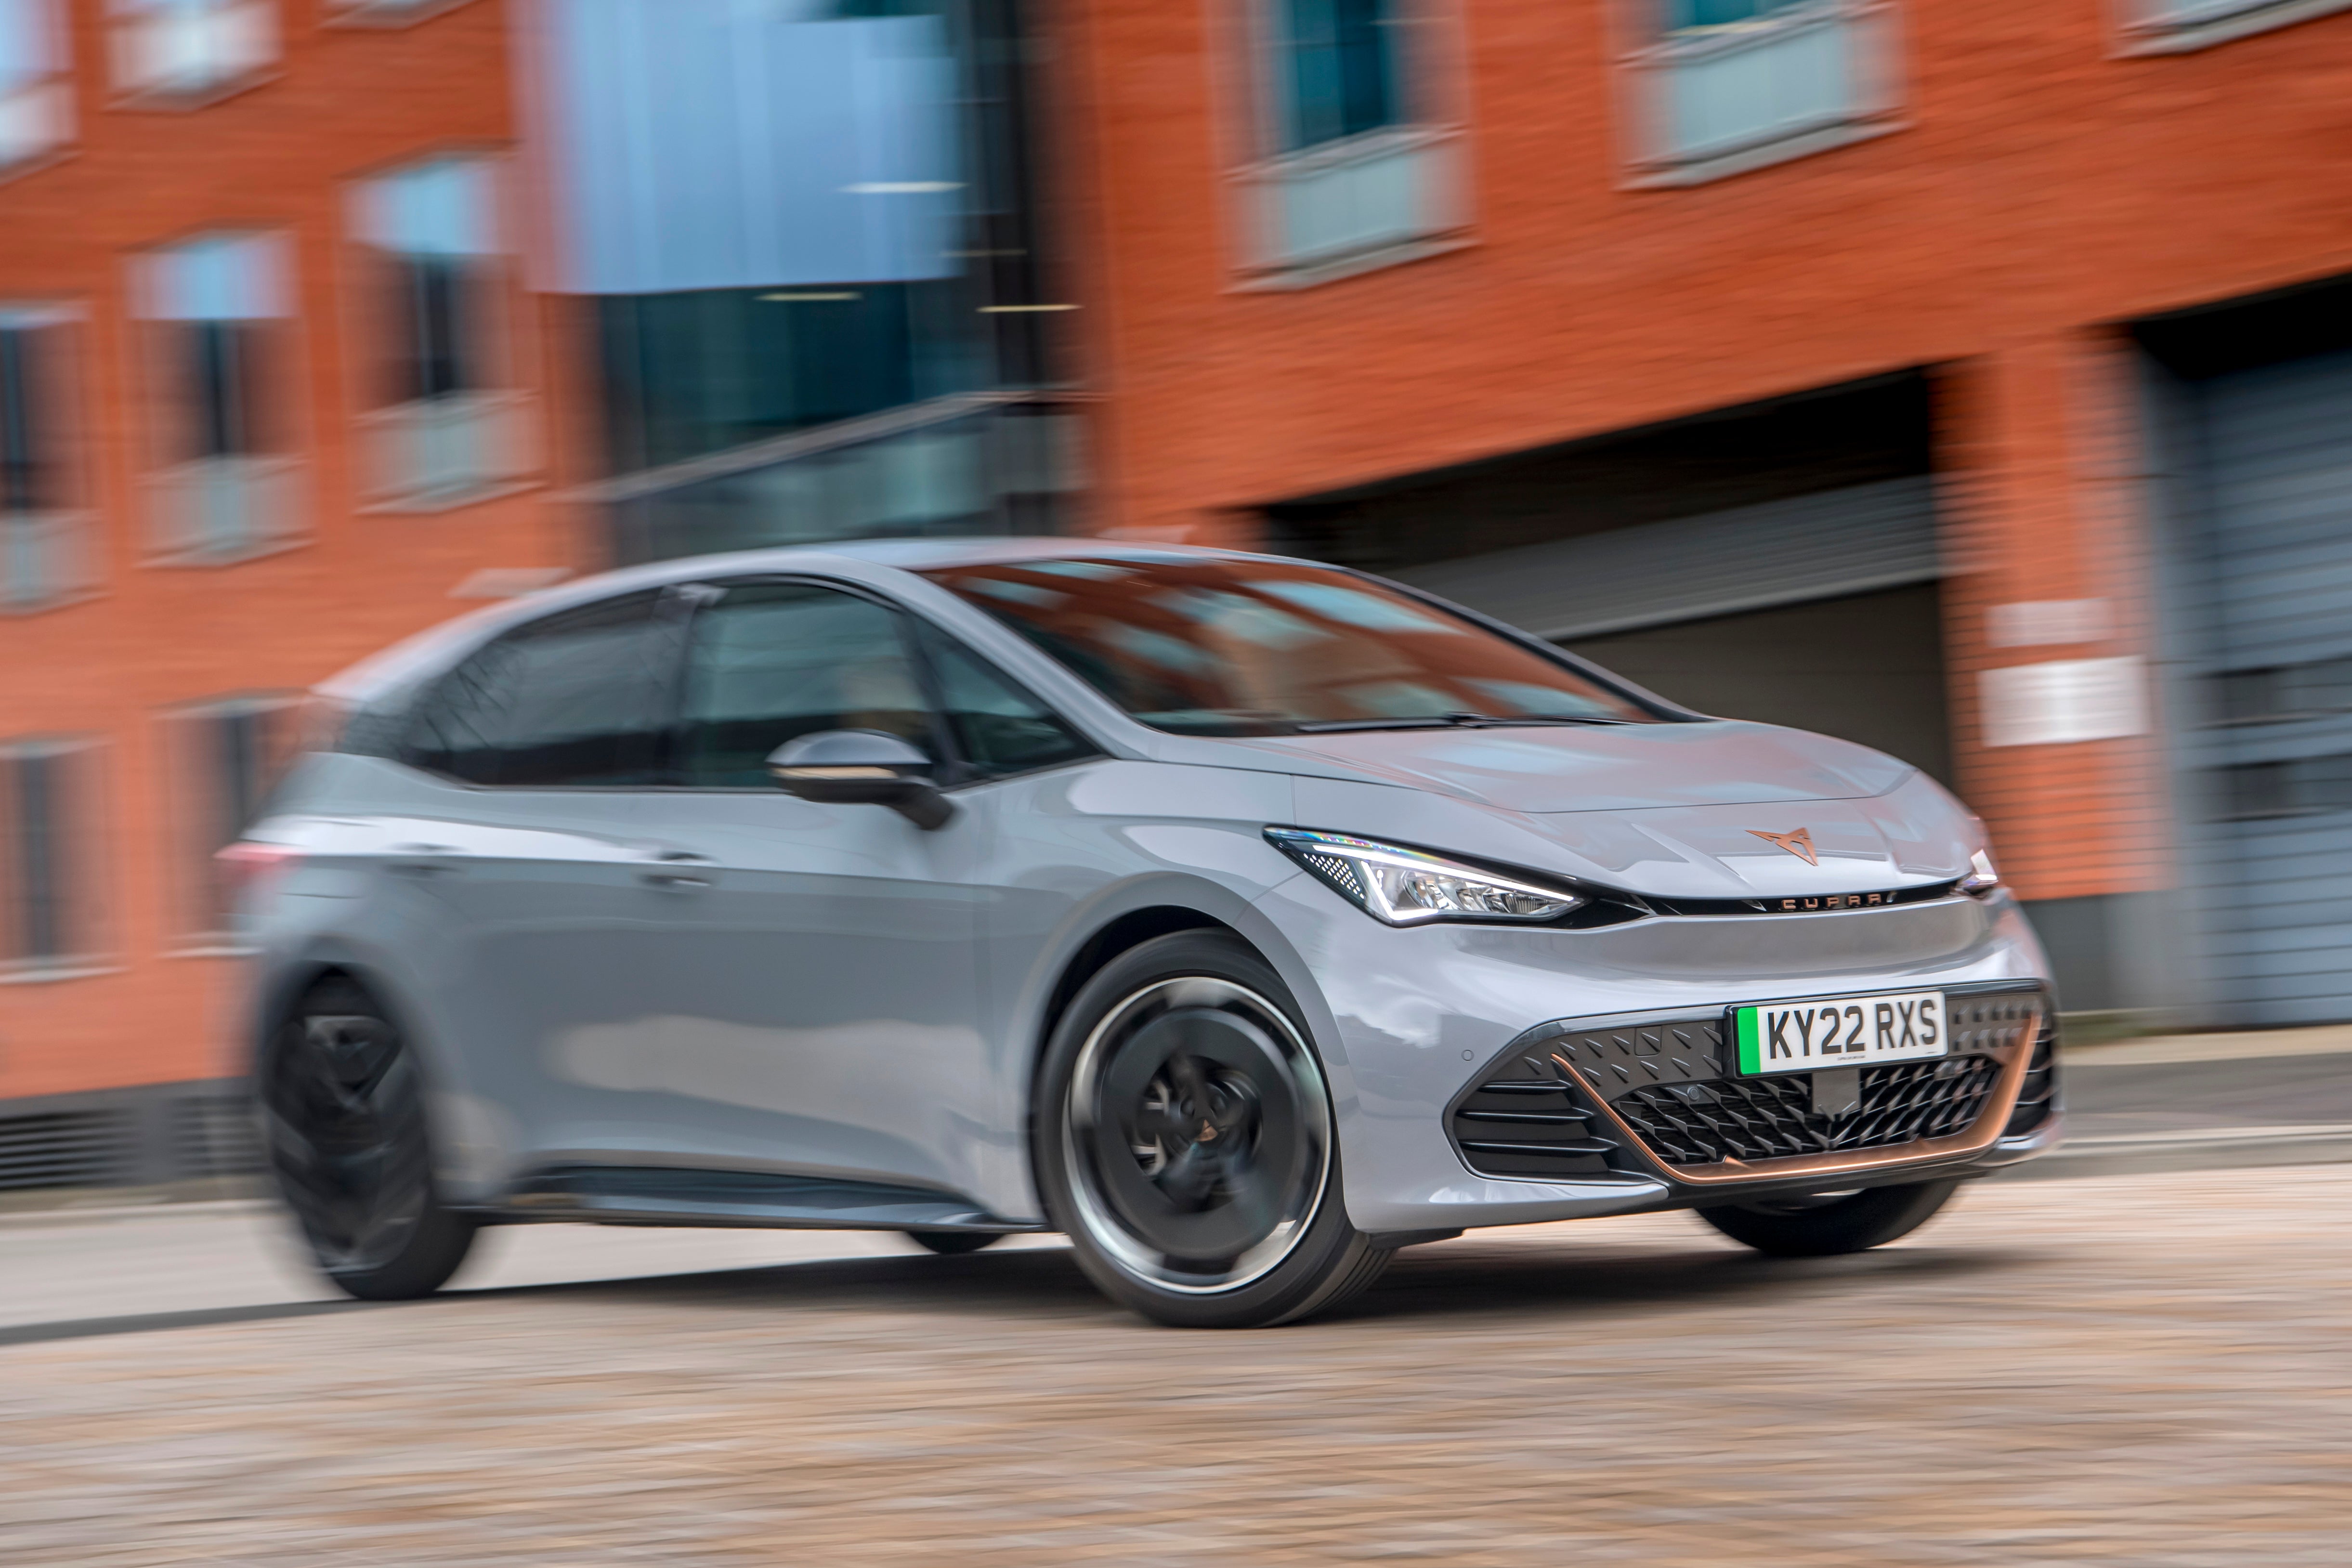 The Cupra gets a smoother snout than the ID.3, reminiscent of the Kia EV6